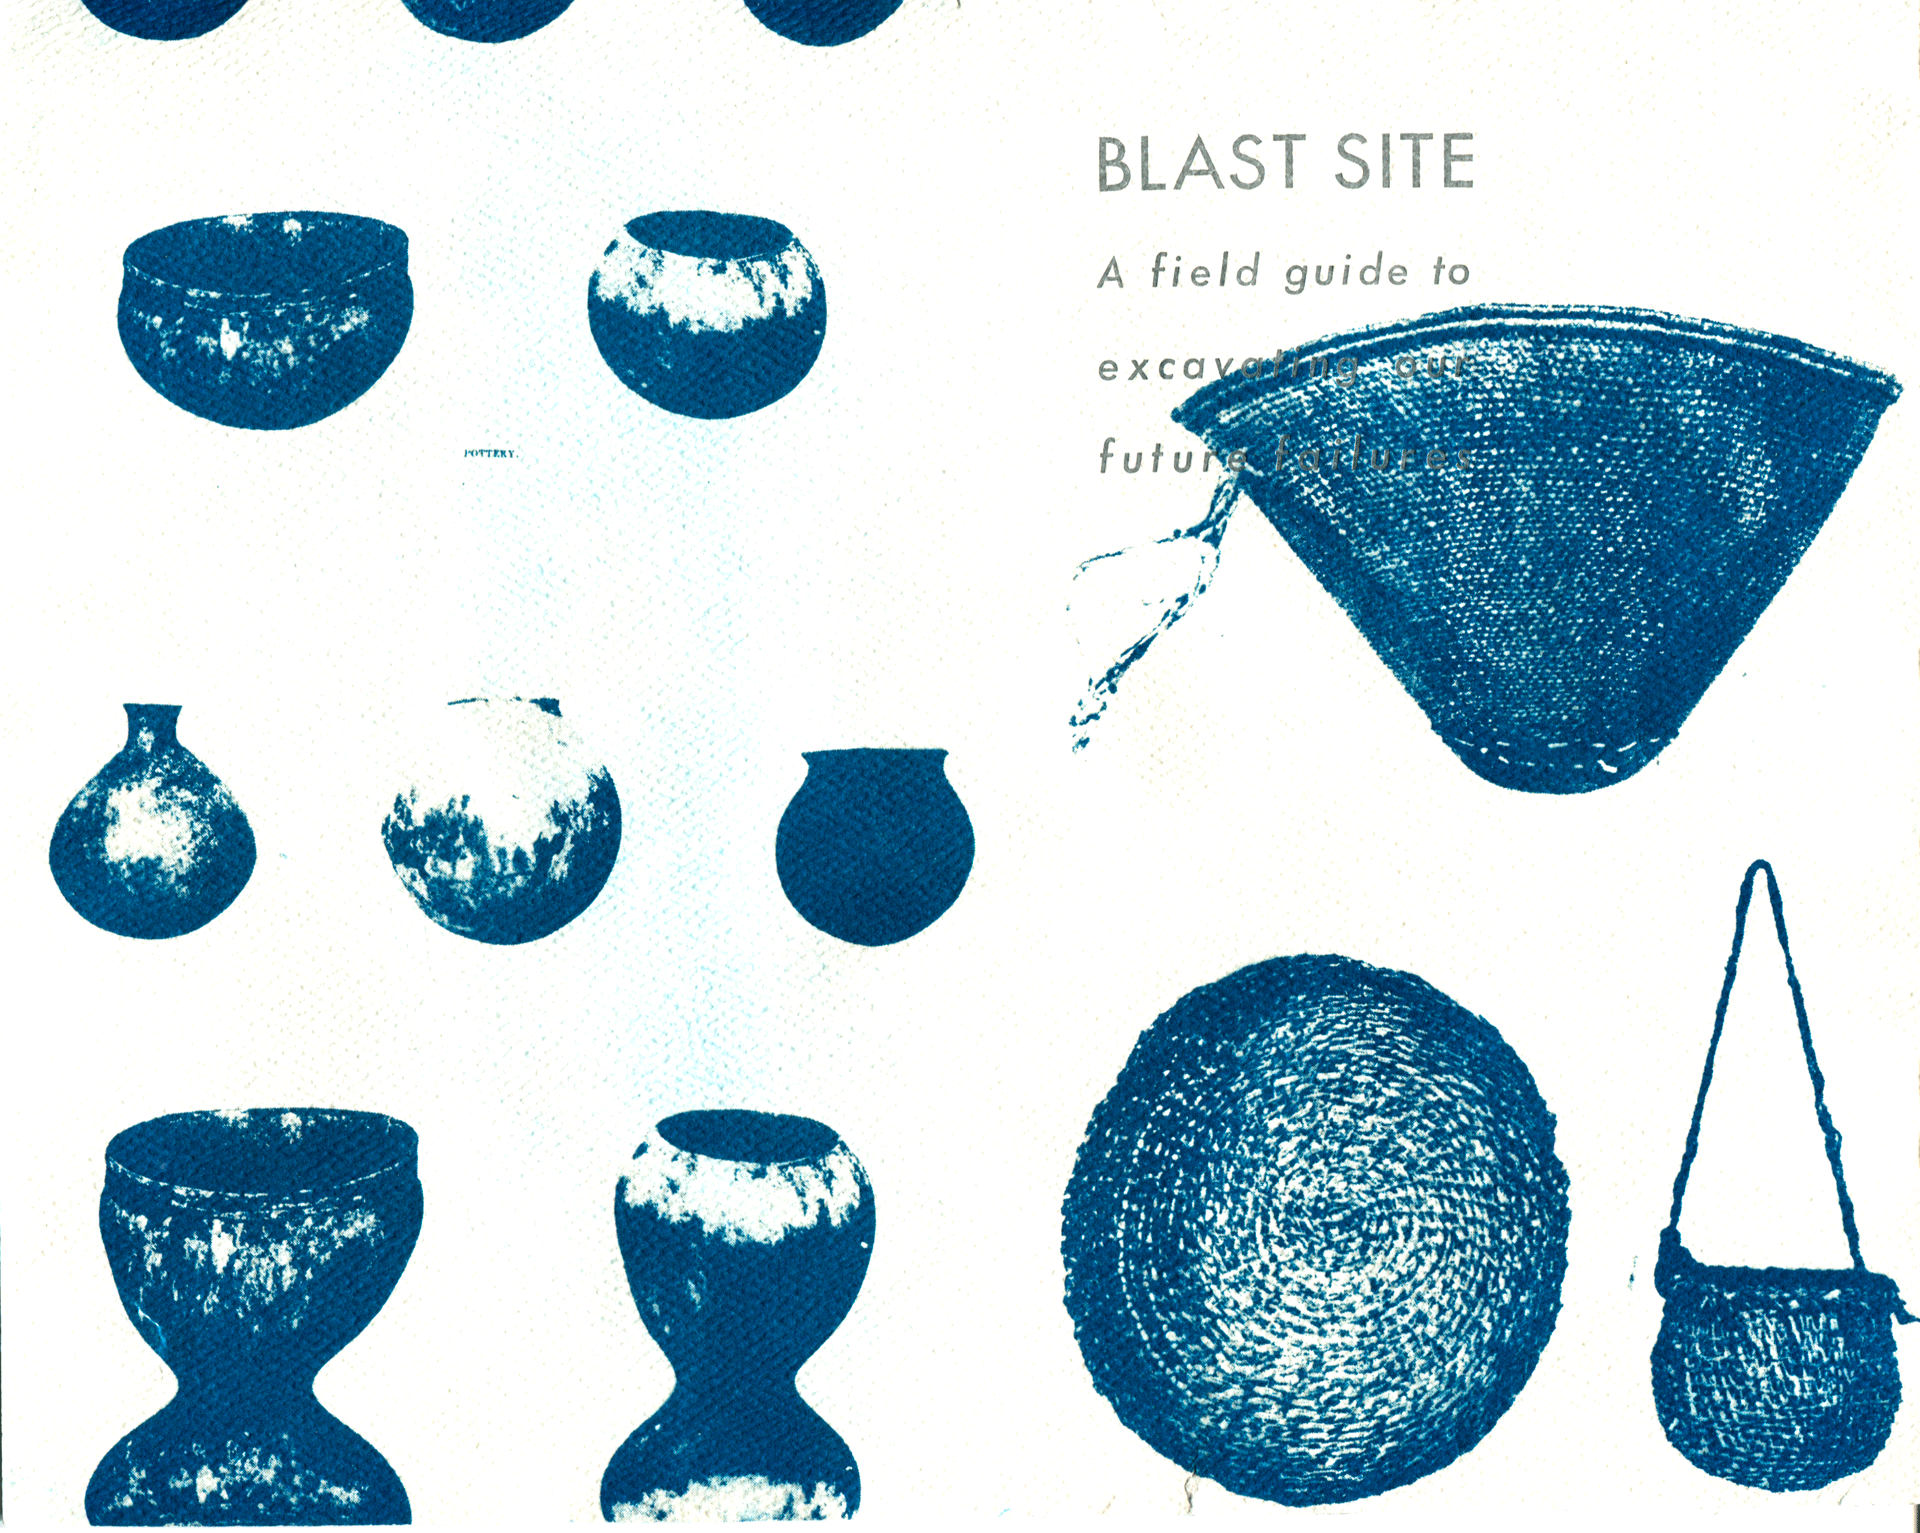 Blast Site: A Field Guide to Excavating Our Future Failures